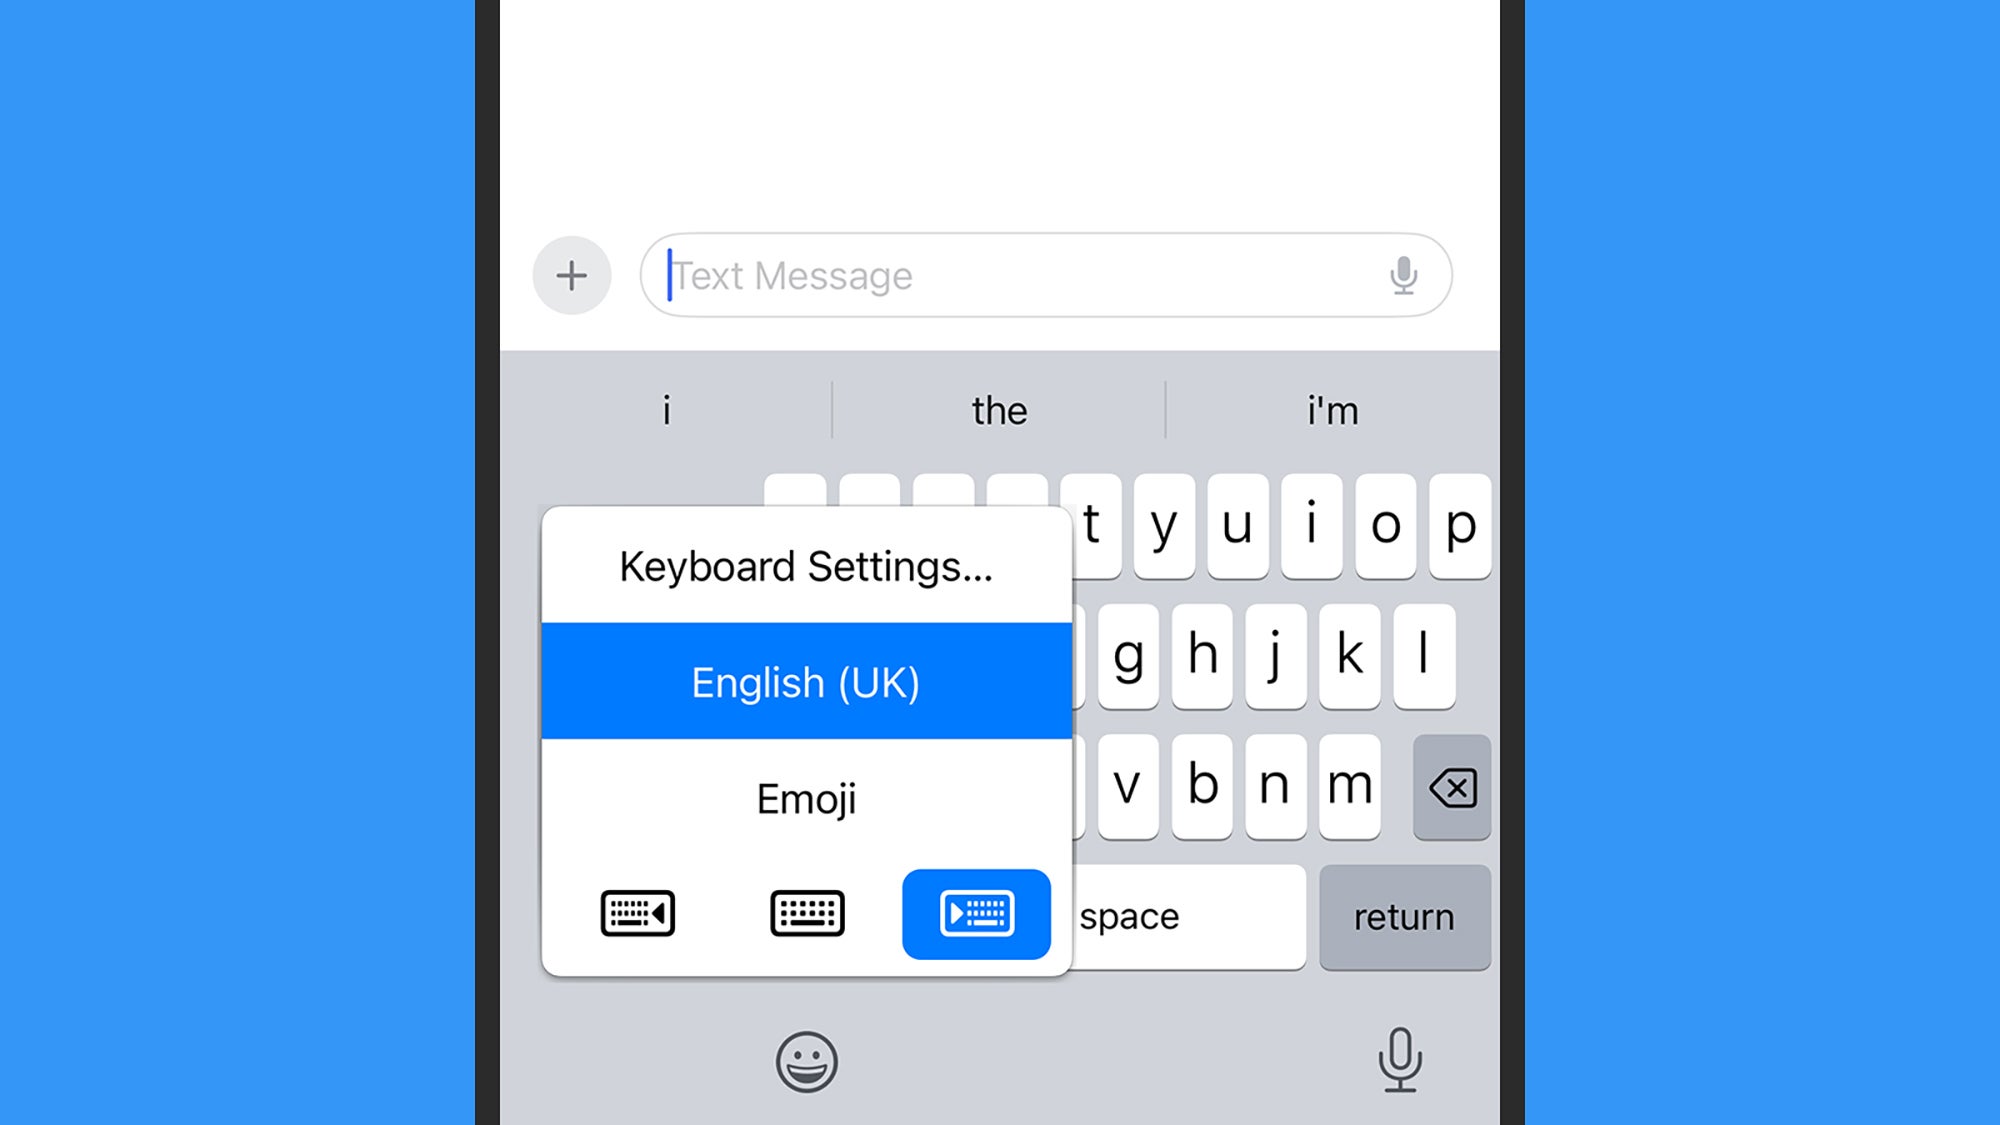 8 handy iphone keyboard tricks you might not know